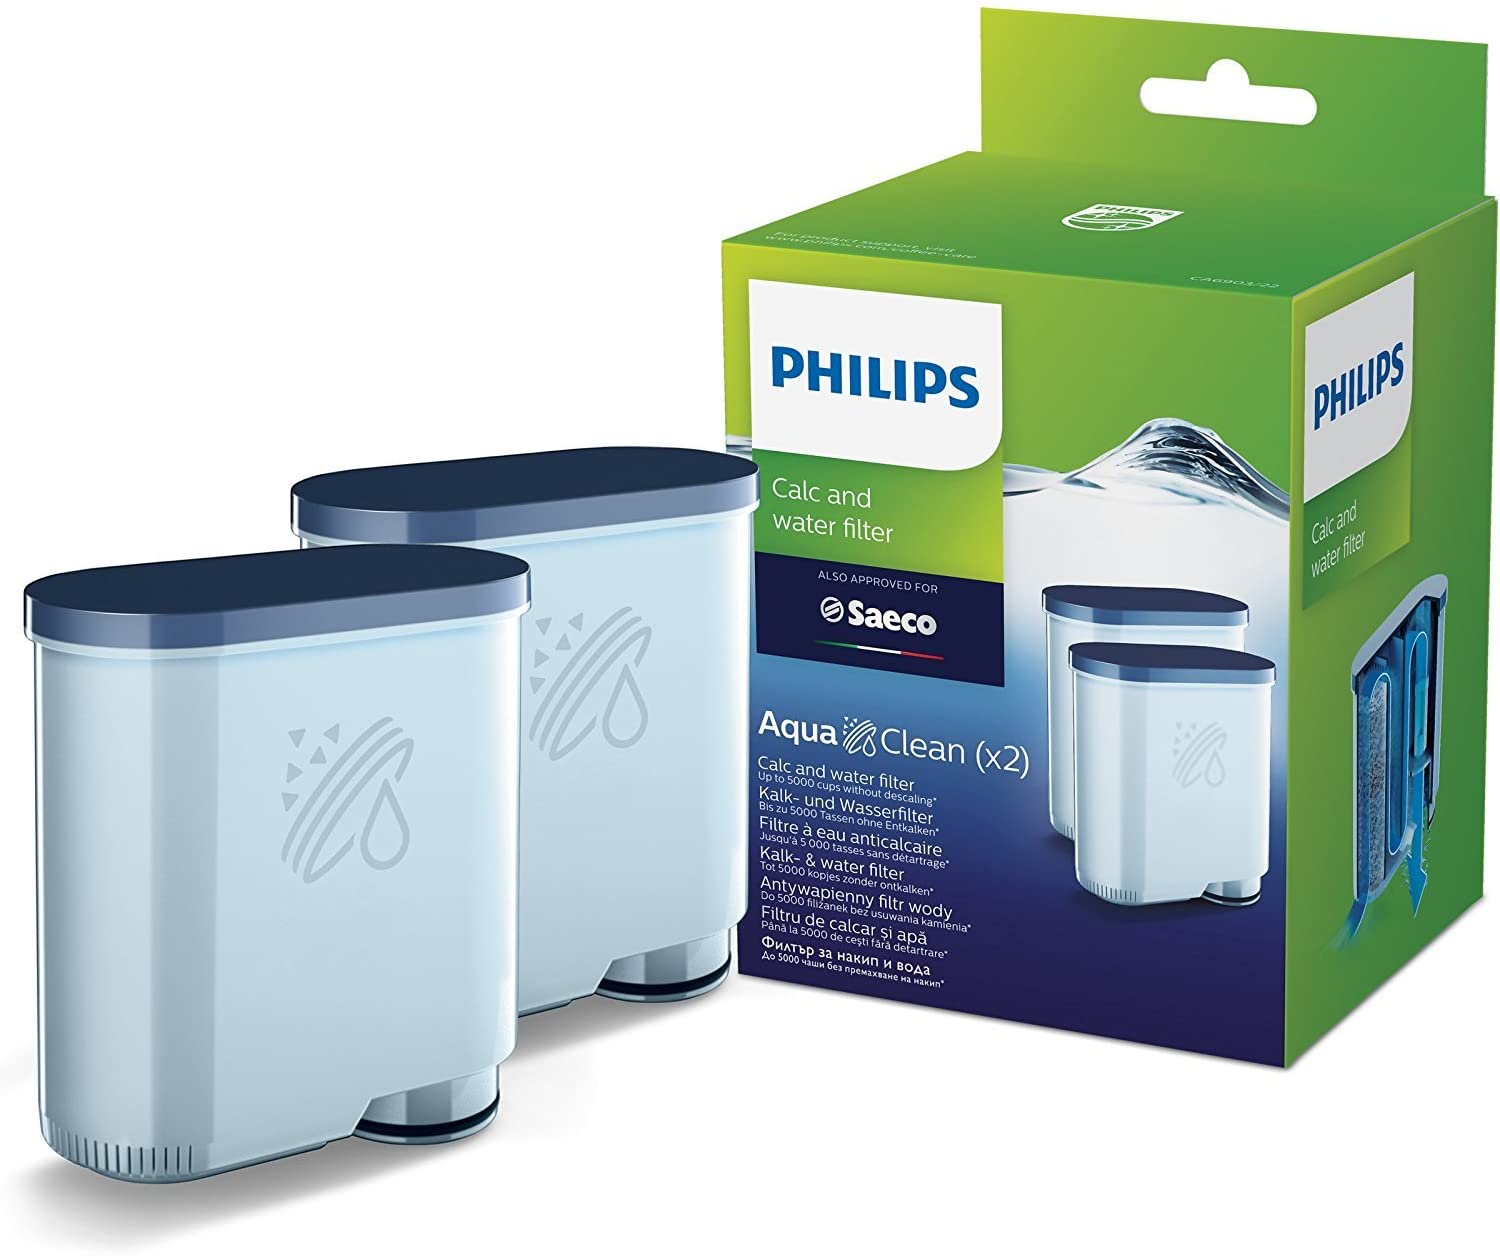 Philips Kalk CA6903 / 22 Aqua Clean water filter for coffee machines, double pack, plastic